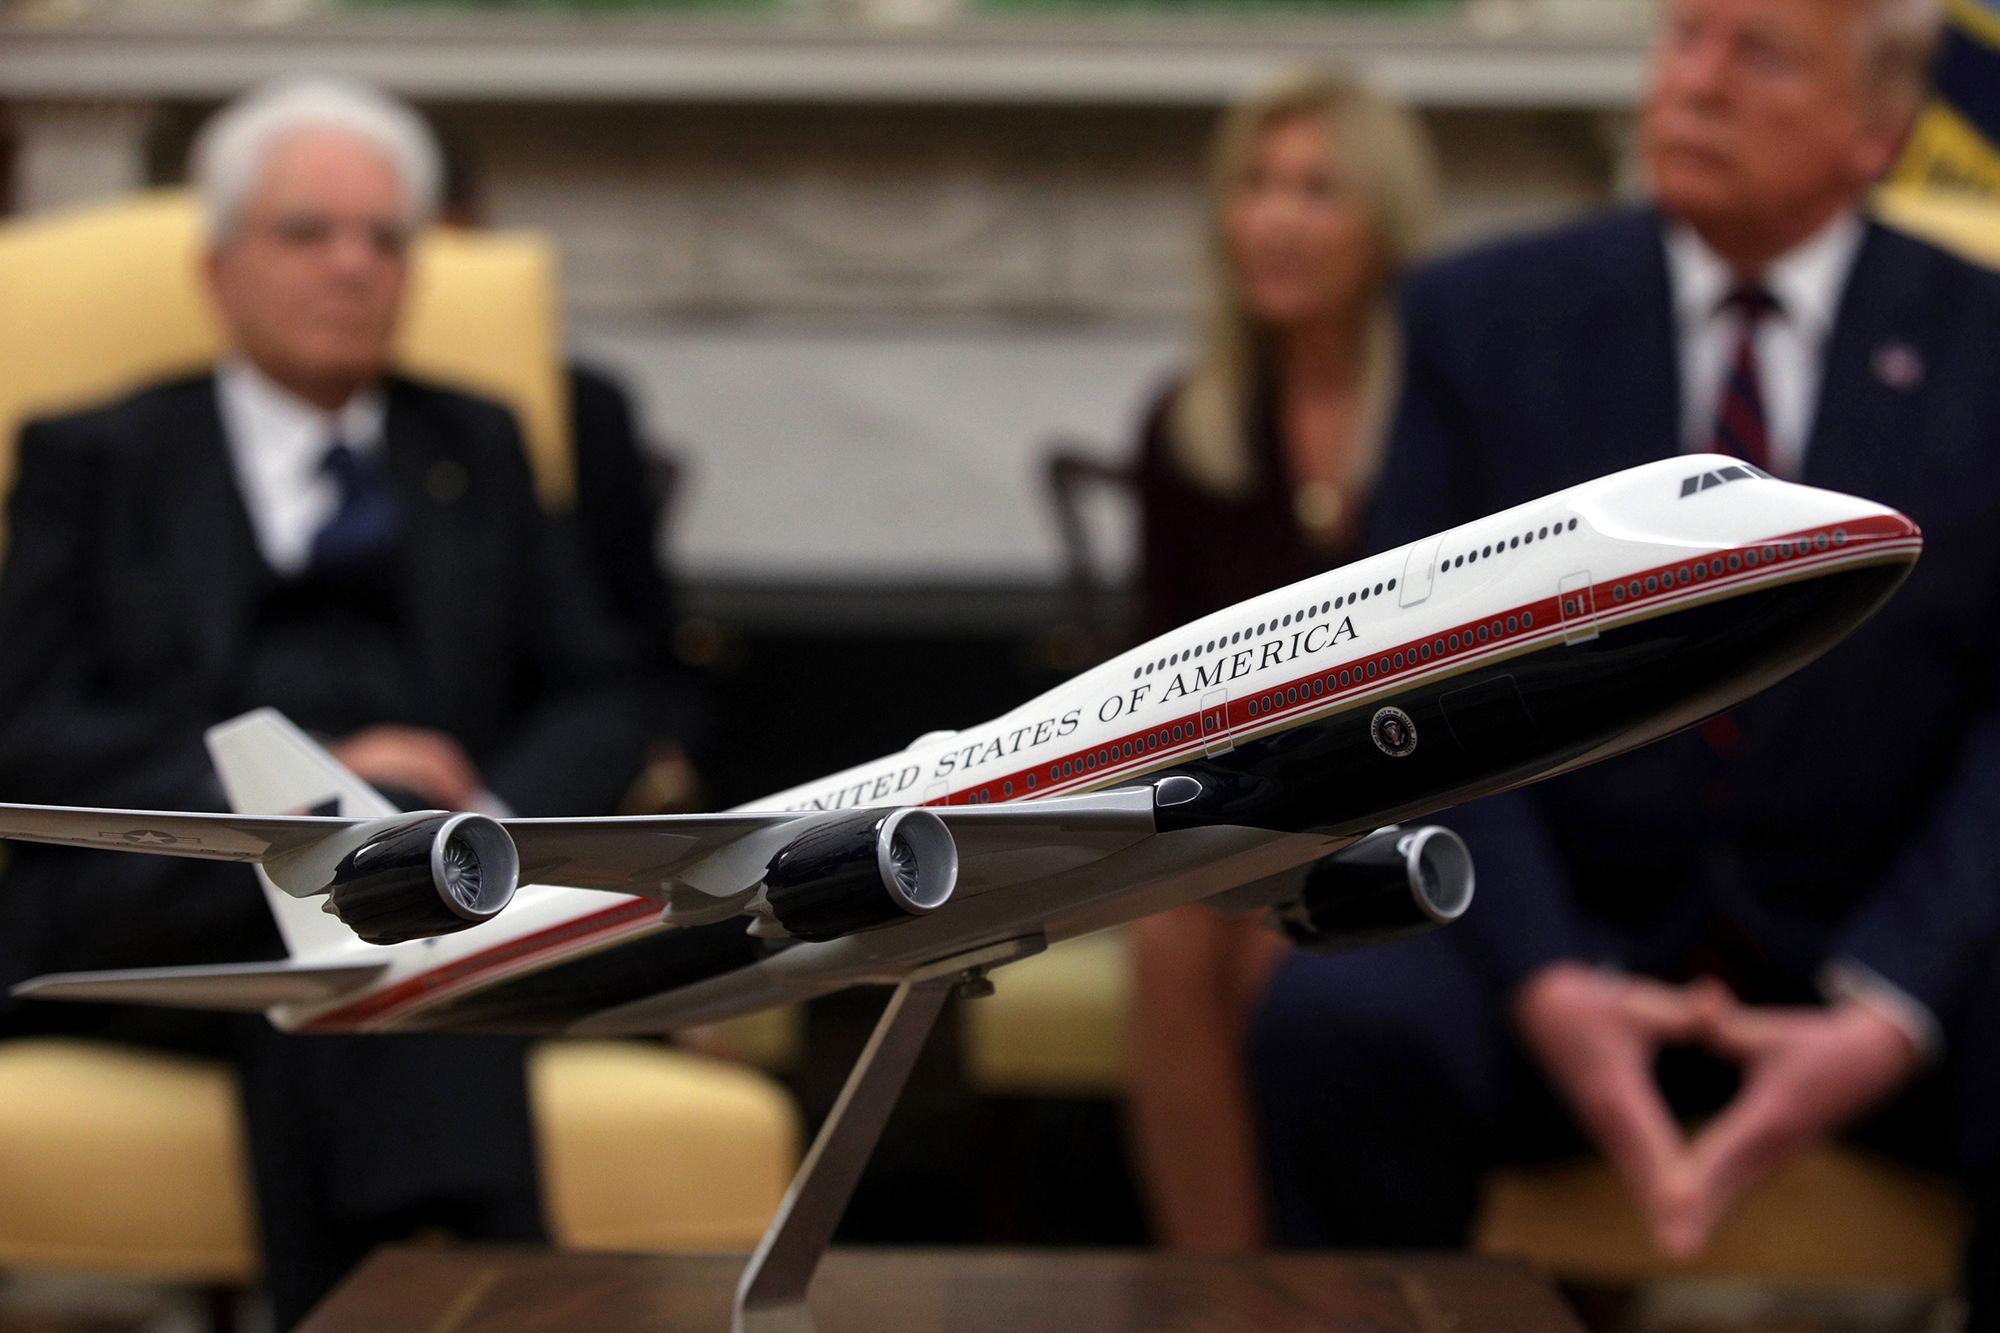 Donald Trump wants to get rid of Air Force One's legendary paint job